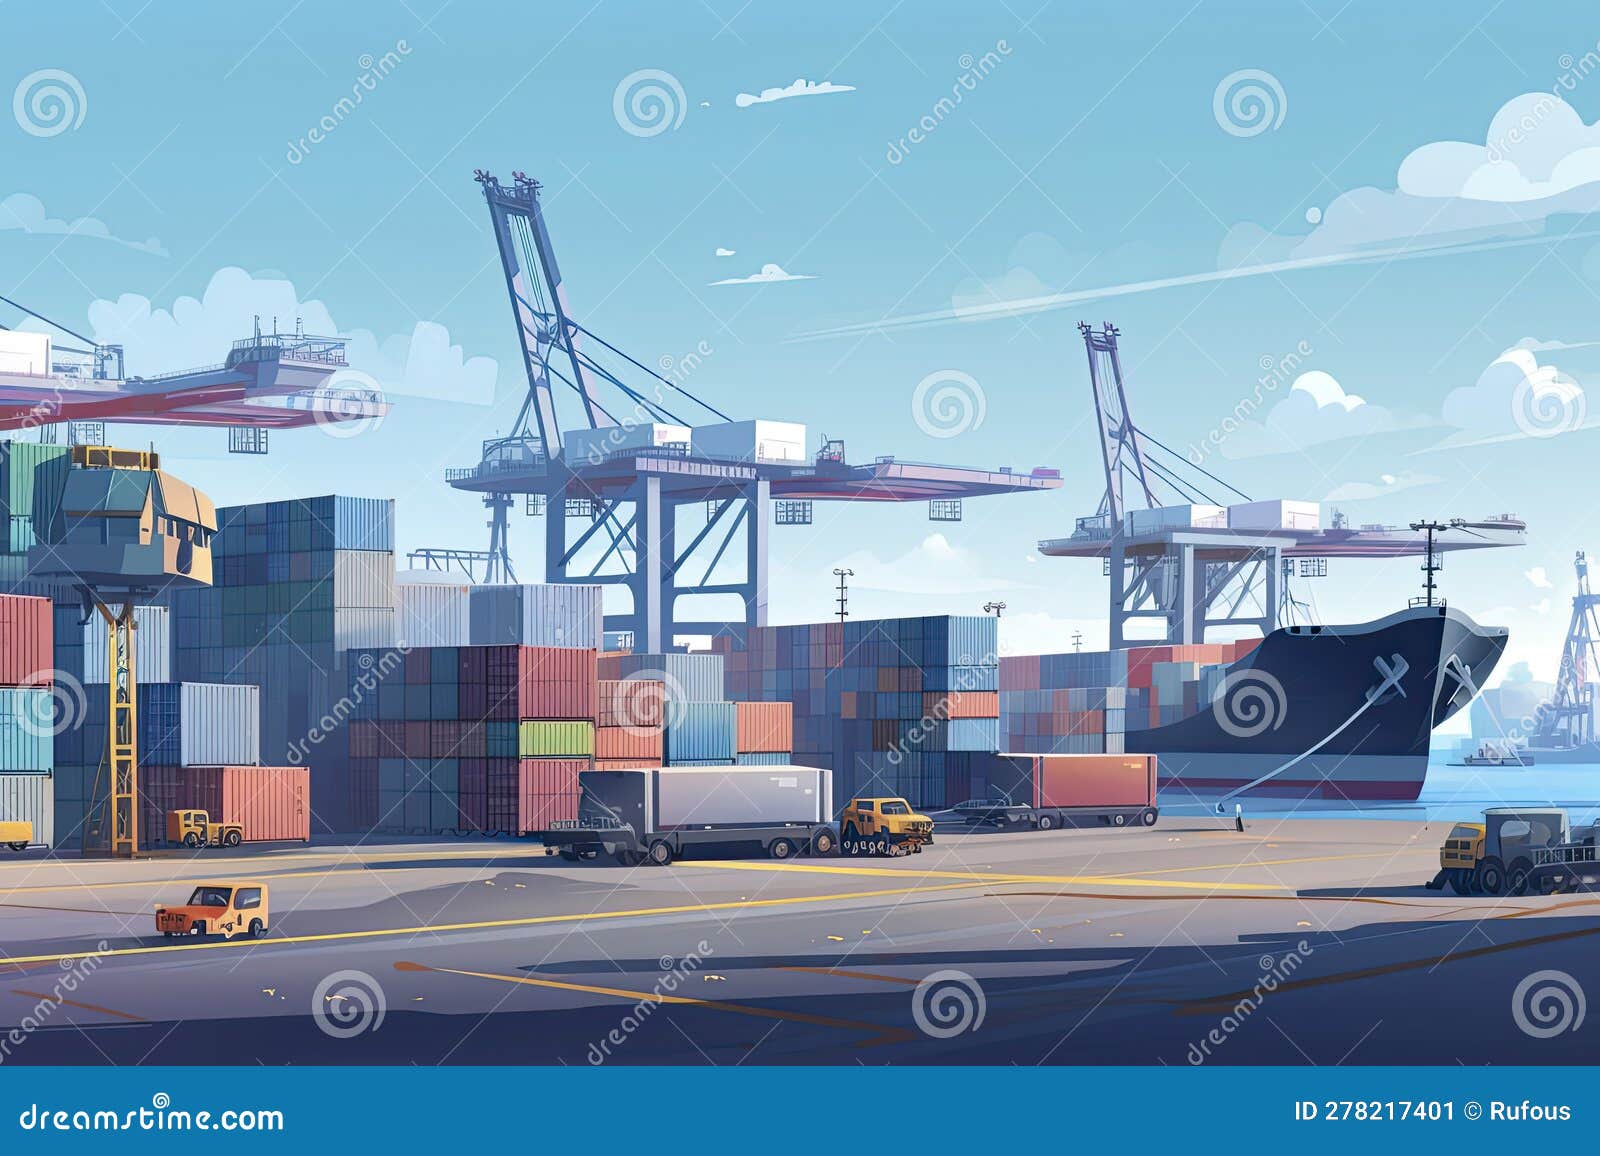 air transportation and transit of container ships loading and unloading in ports, transportes